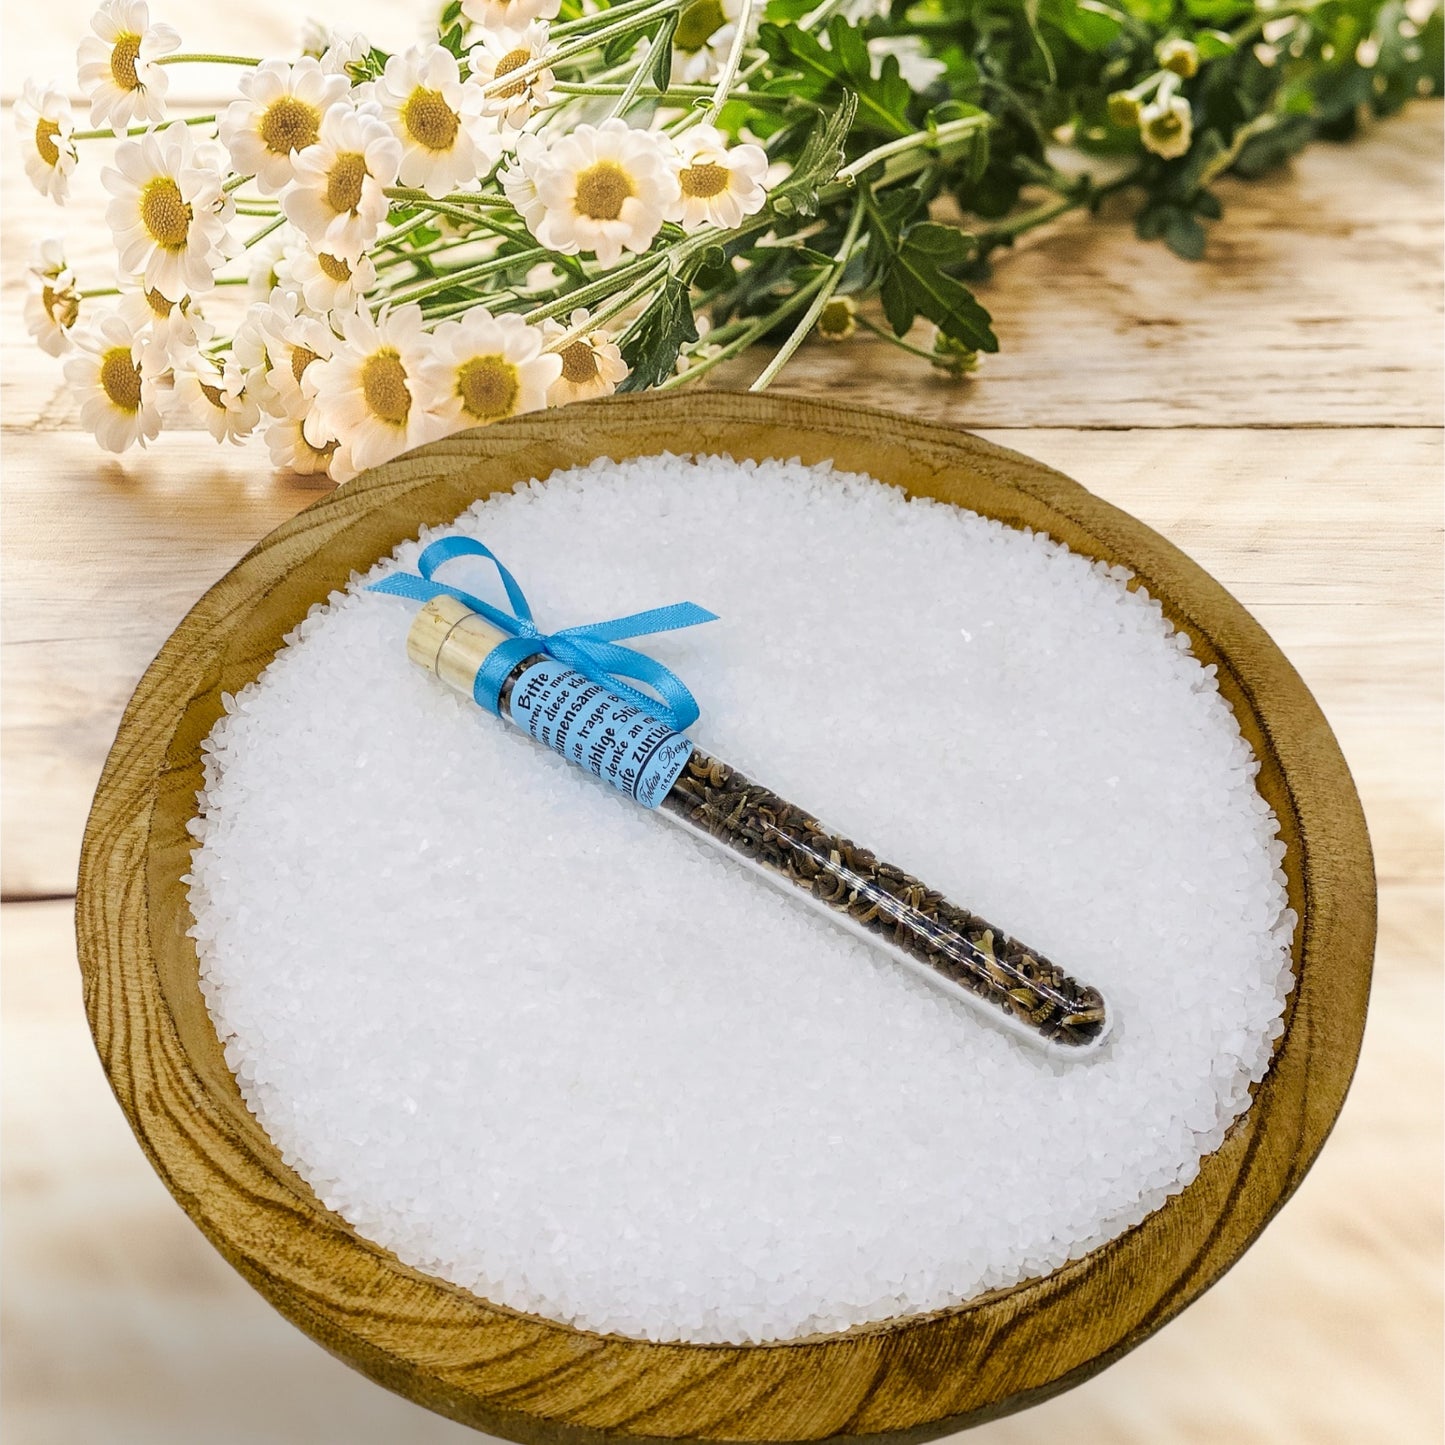 Blooming memories: Personalized guest gift with flower seeds in a stylish test tube